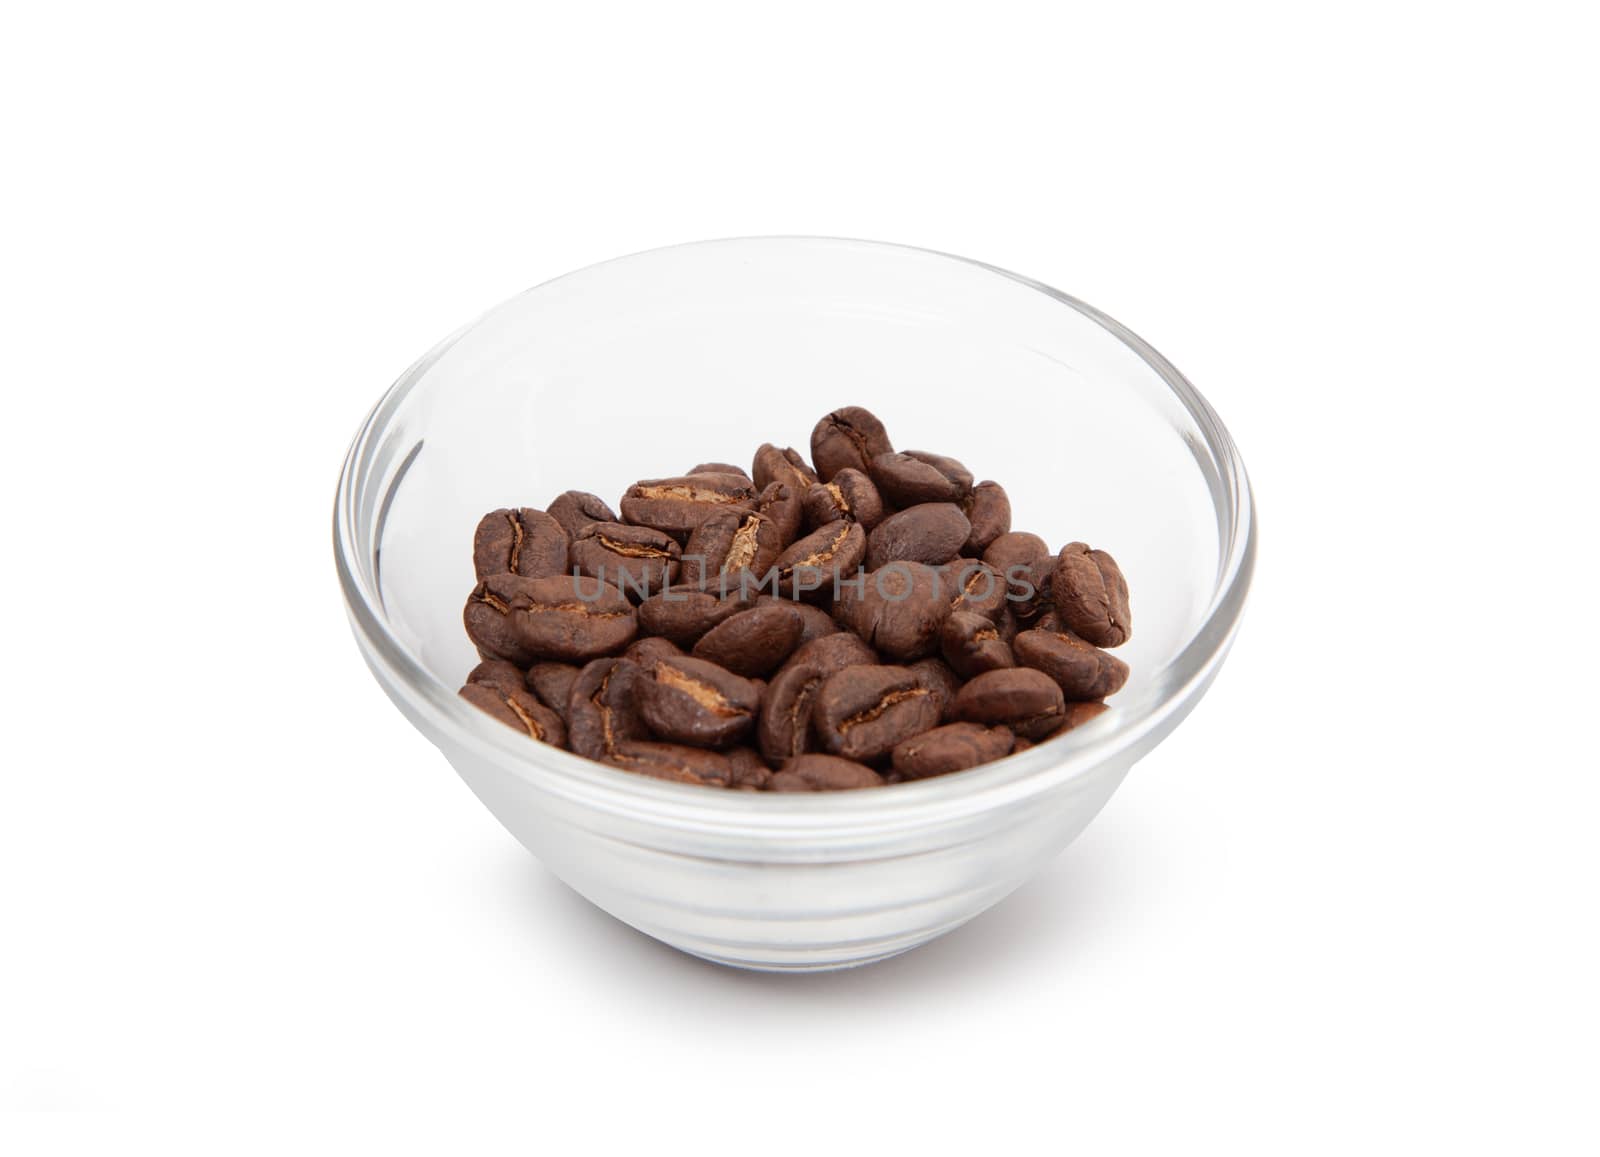 Roasted coffee beans in a glass bowl. by SlayCer